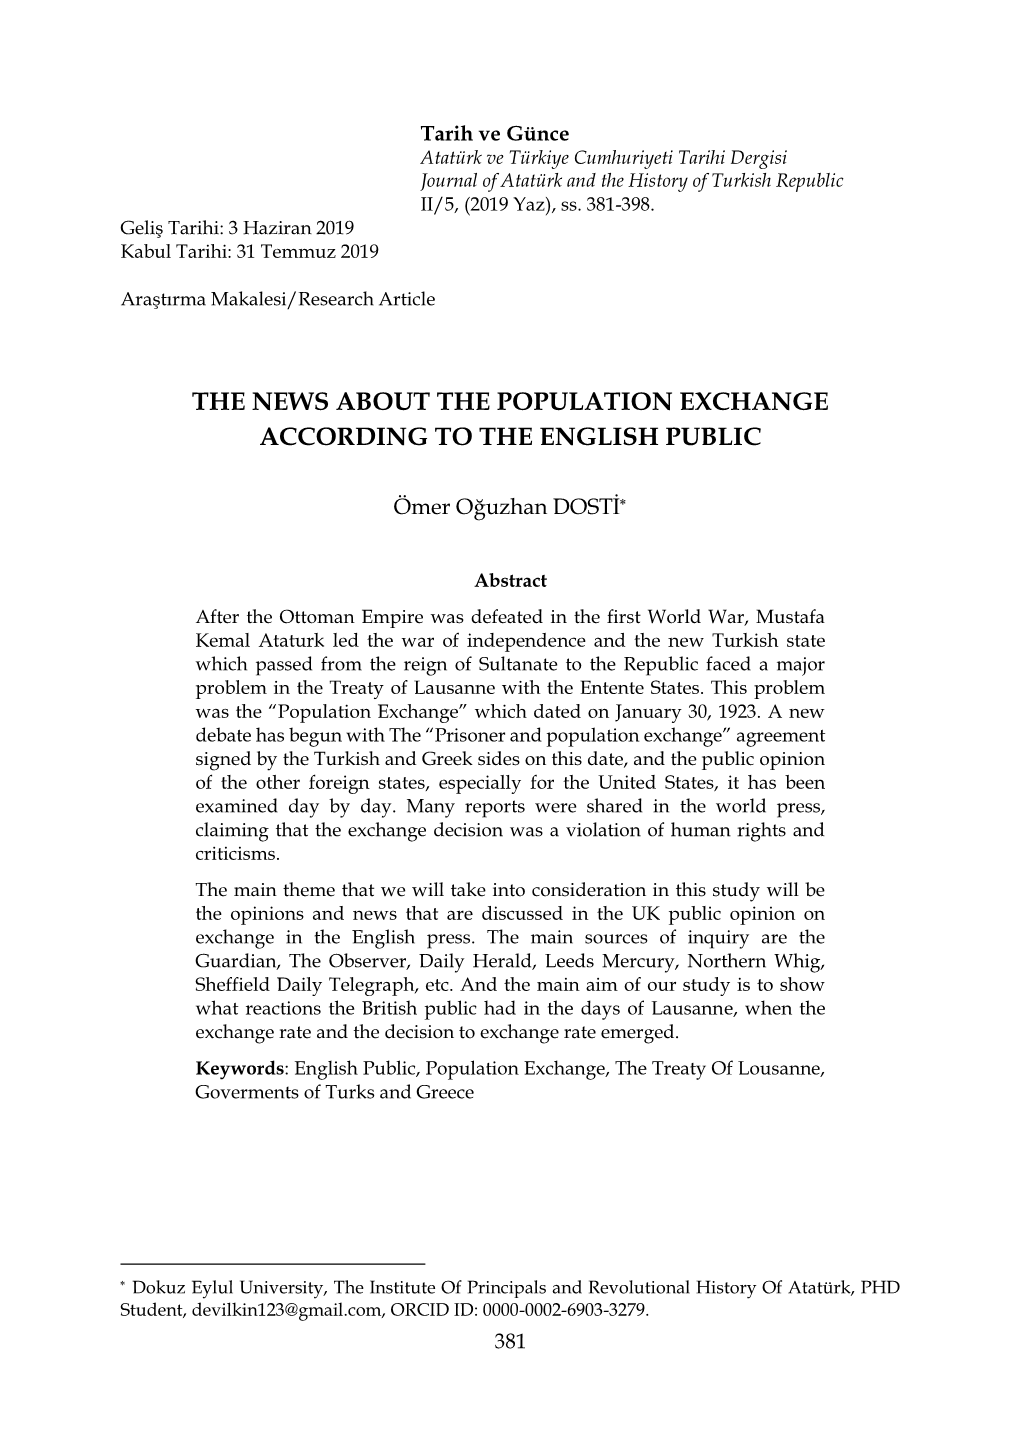 The News About the Population Exchange According to the English Public